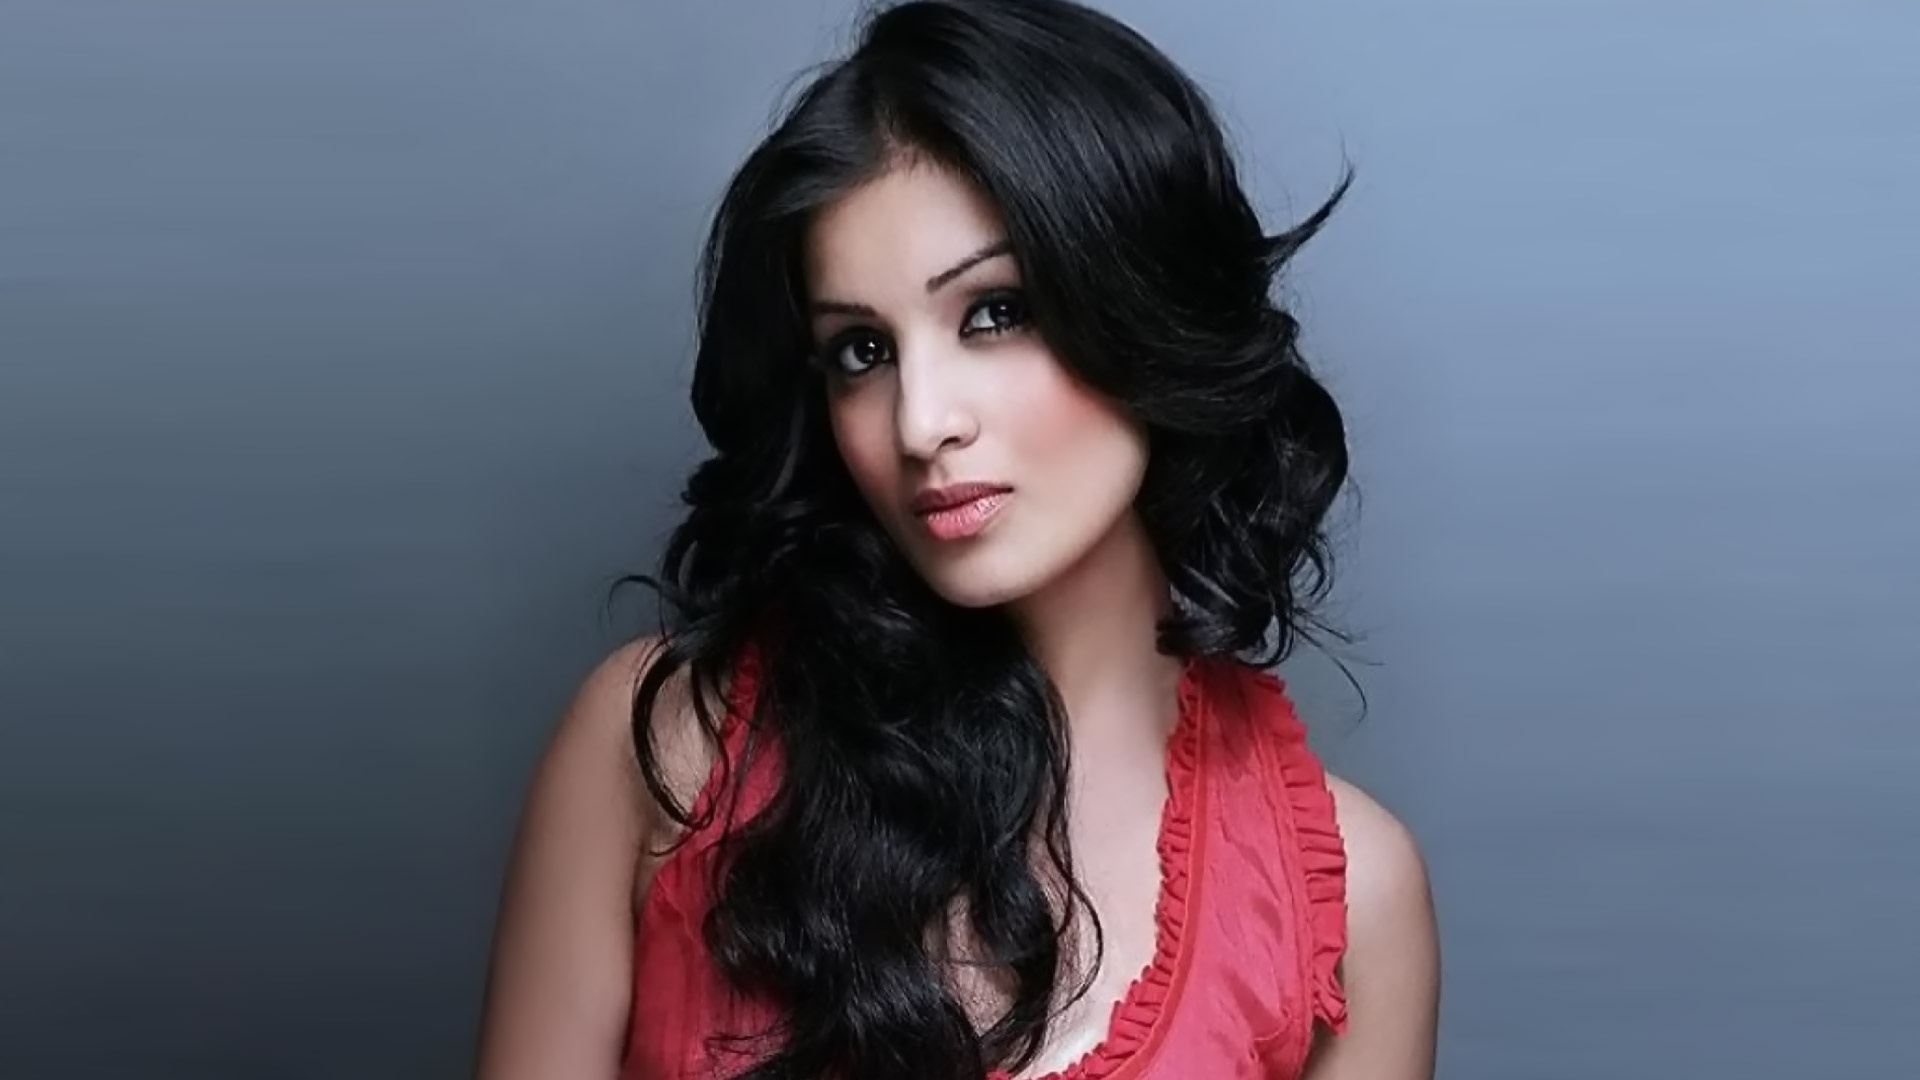 Pallavi Sharda enjoys experimenting with various characters | India Forums